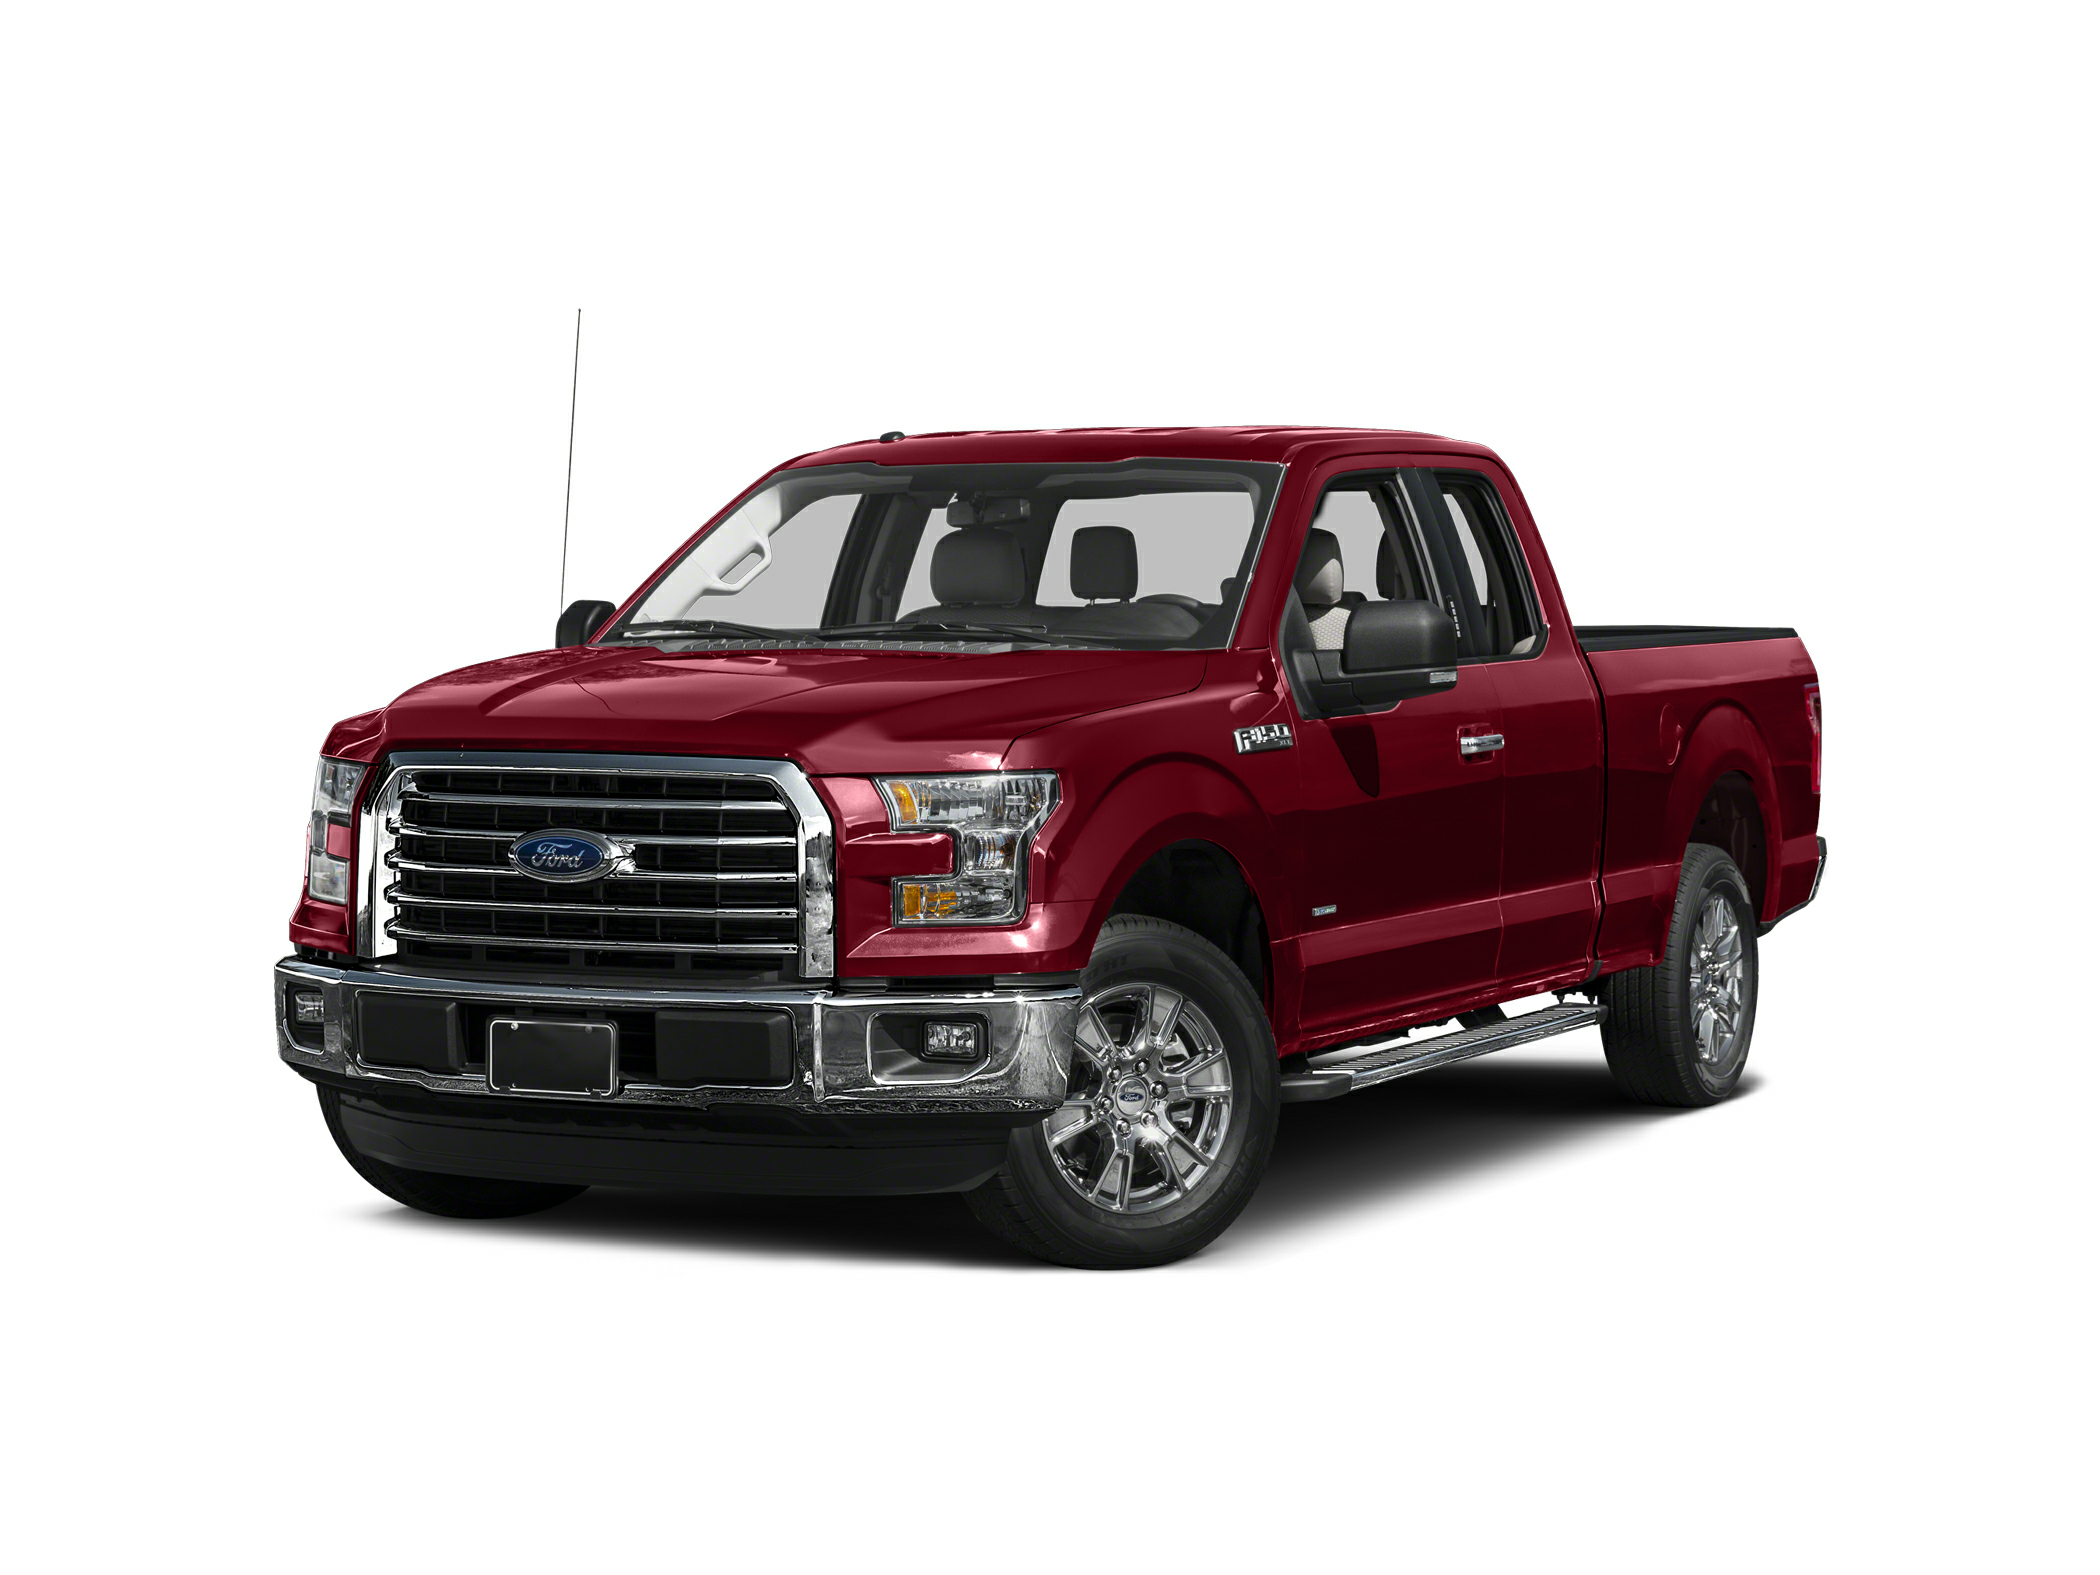 2015 Ford F-150 Specs